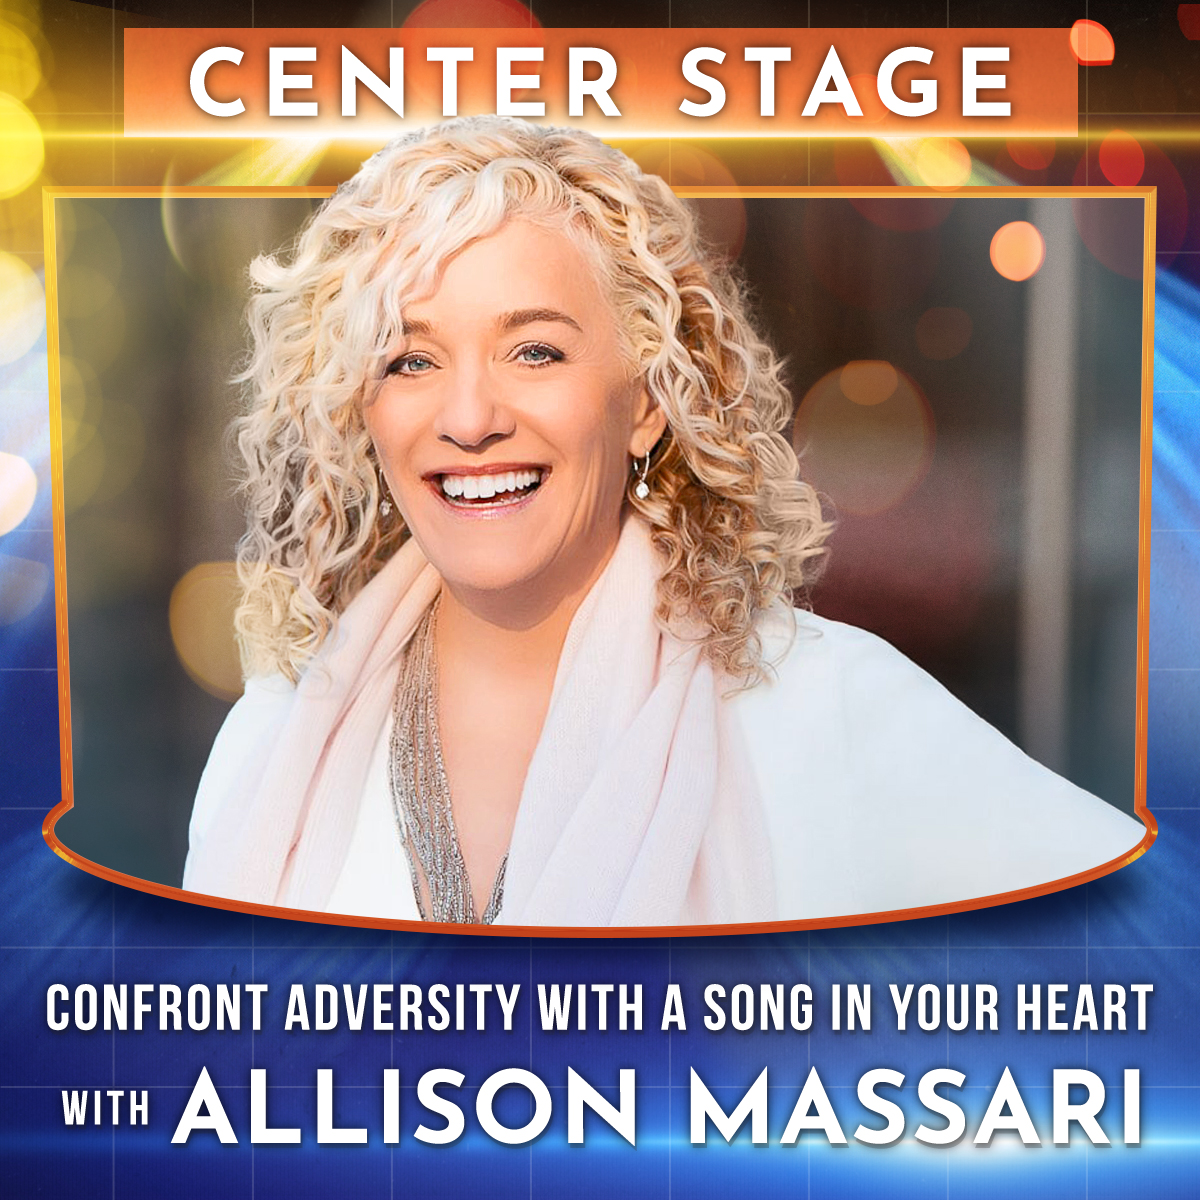 Confront Adversity in Life with a Song in Your Heart with Allison Massari